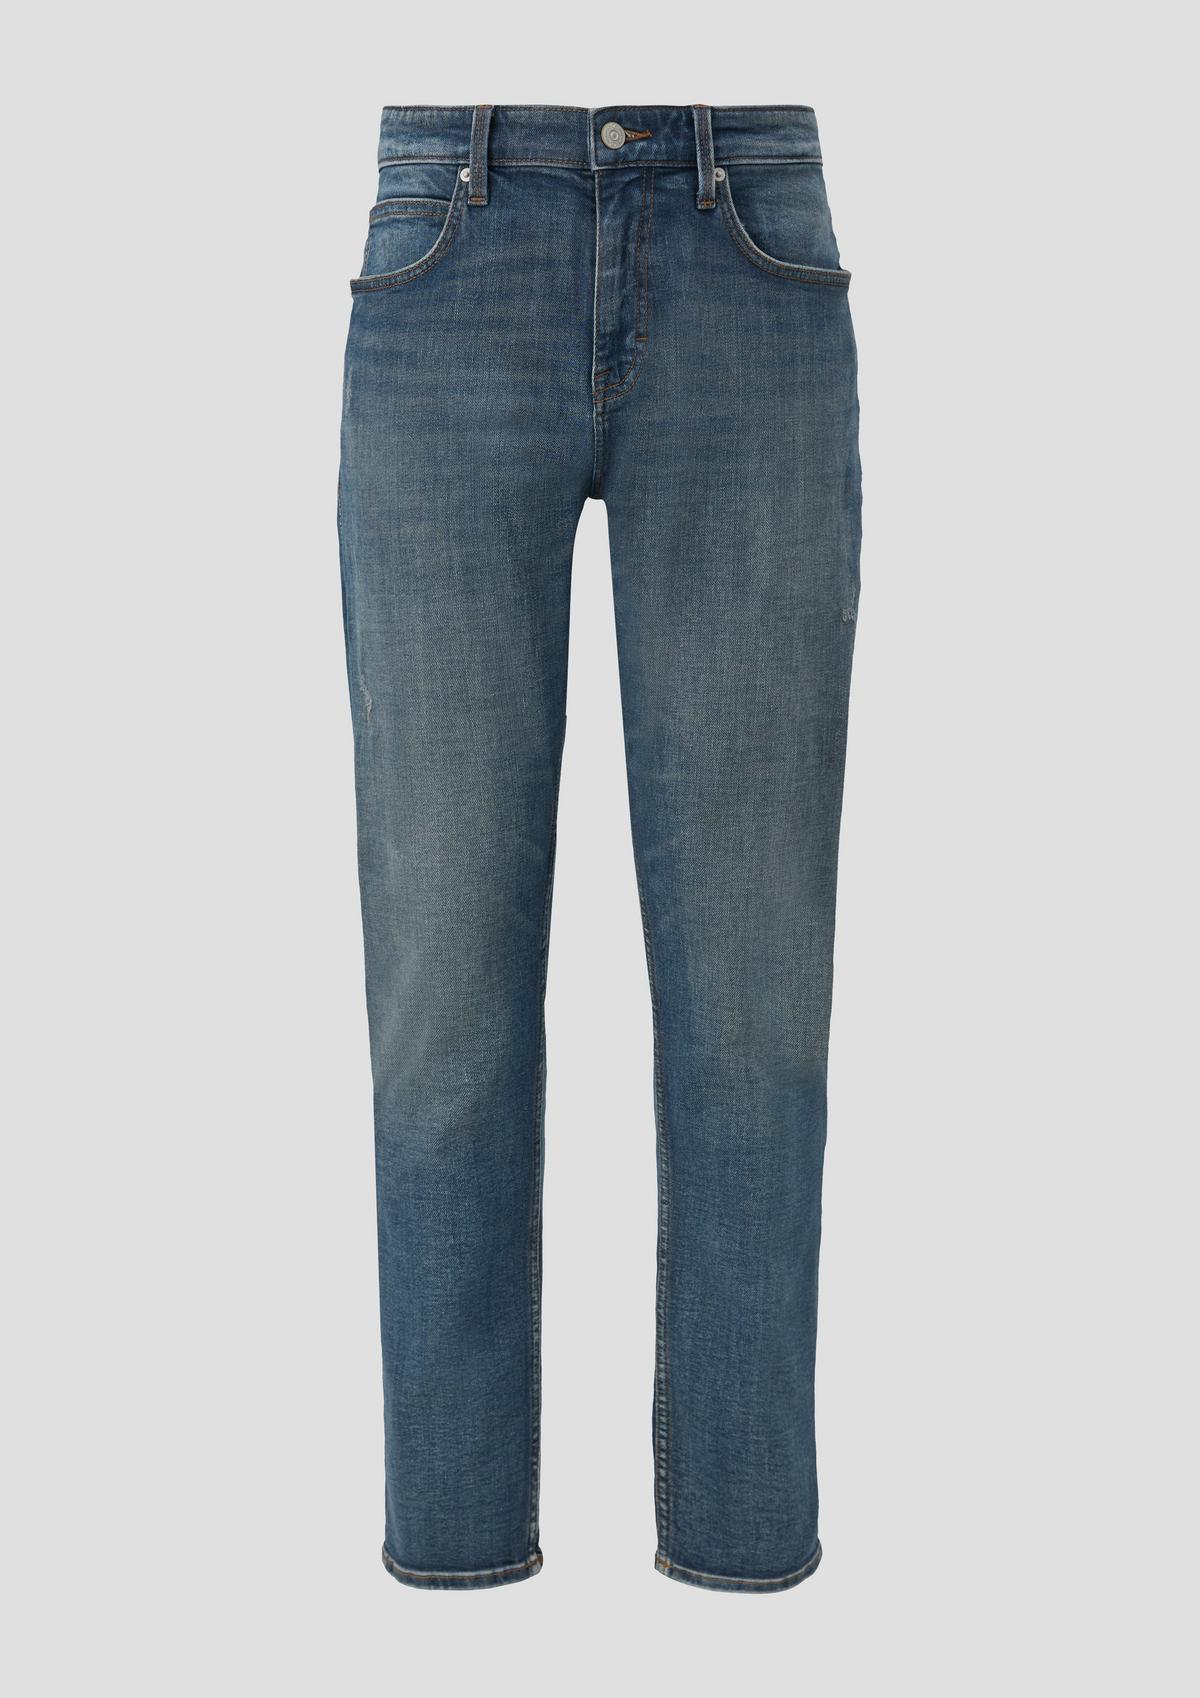 s.Oliver Jeans Shawn / Regular Fit / Mid Rise / Tapered Leg